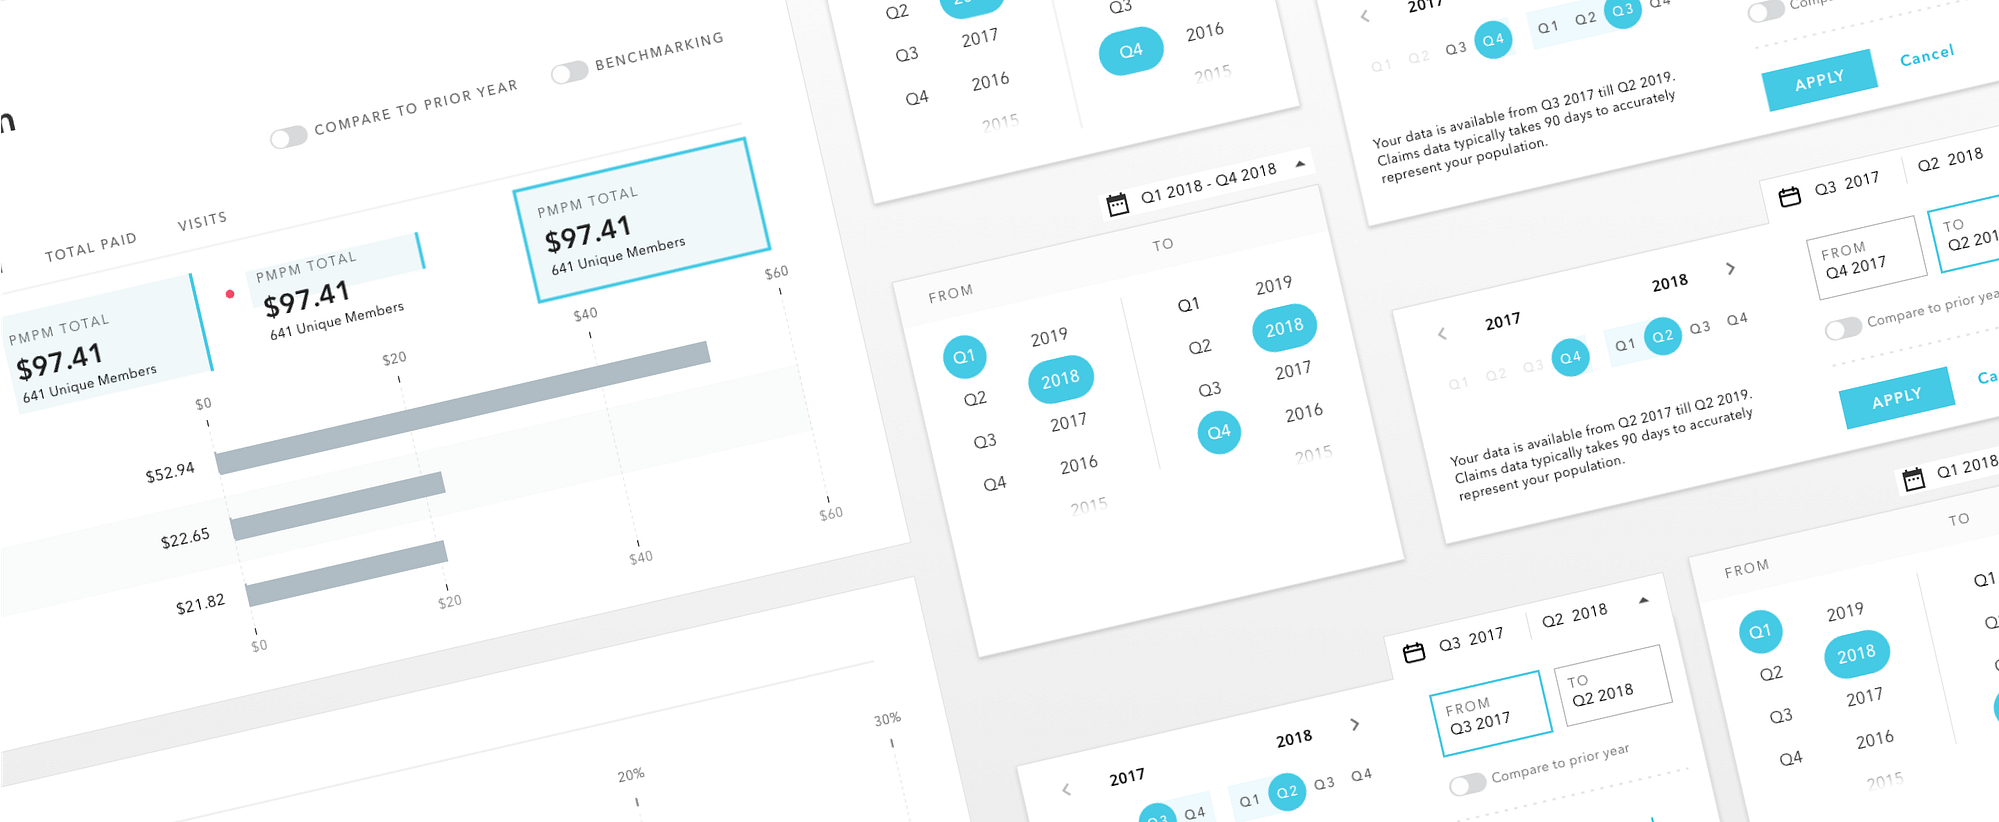 Collage of UI Design elements showing data analysis visualizations